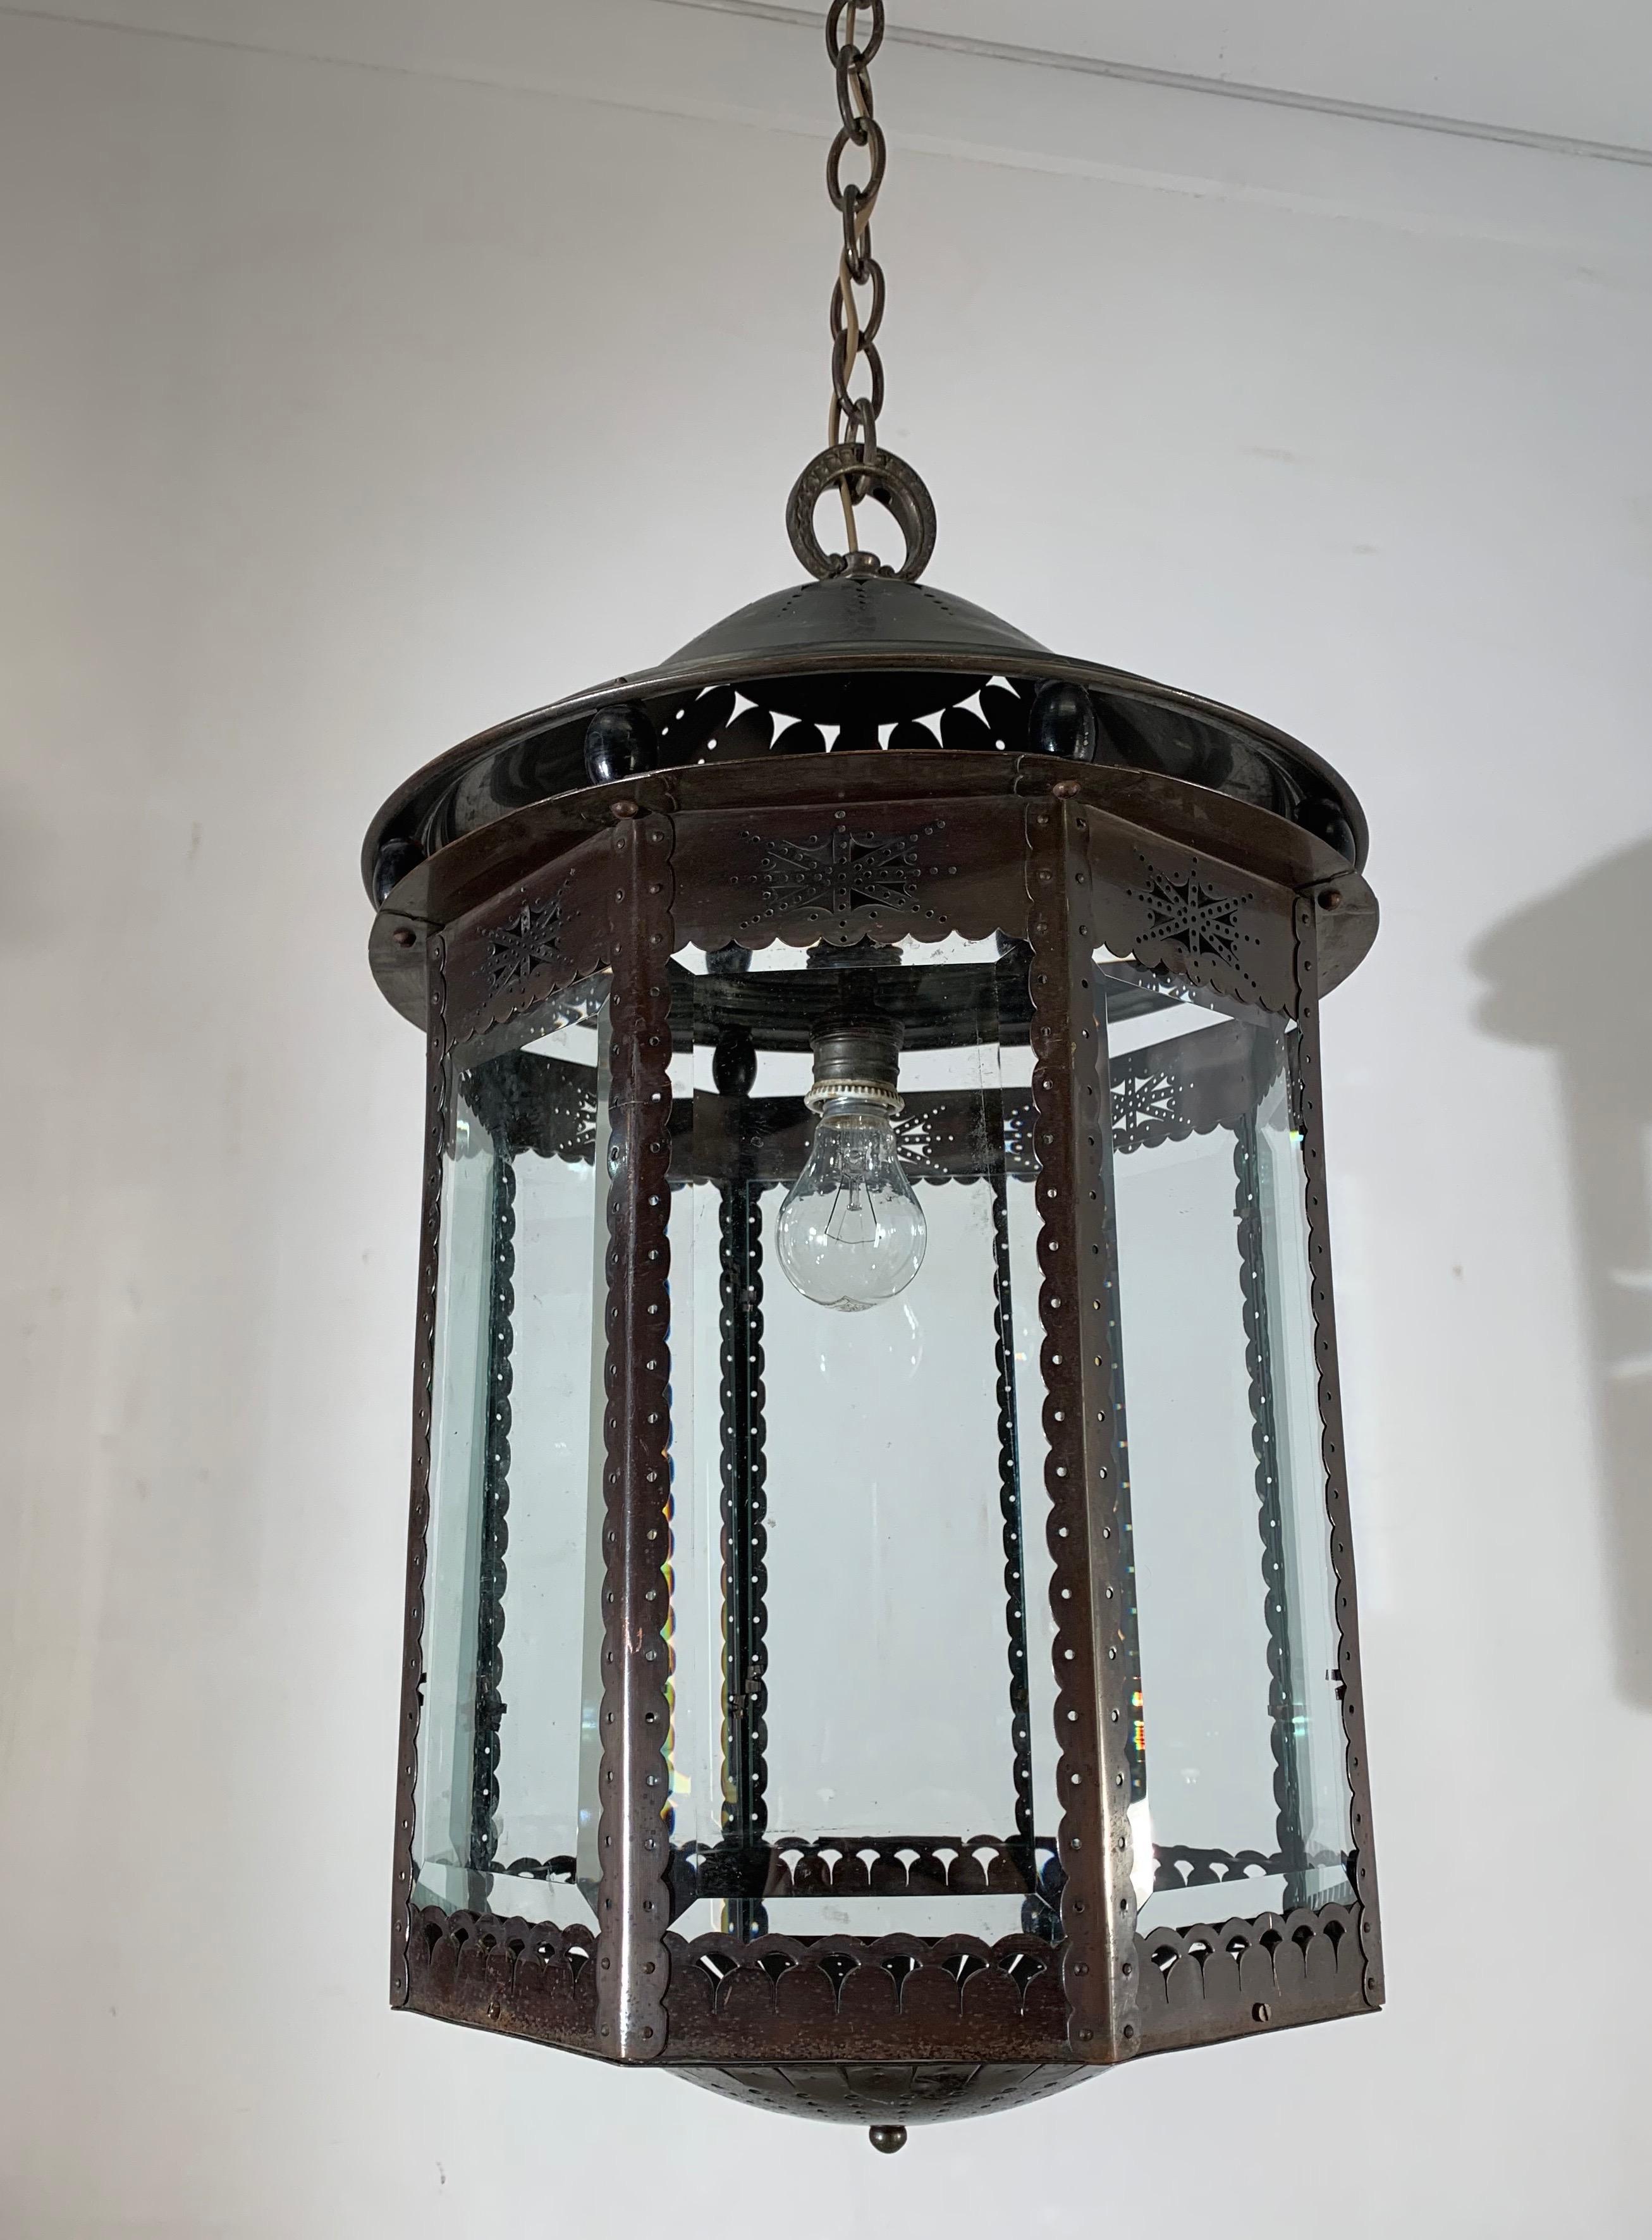 Large and all handcrafted Dutch Arts & Crafts pendant by Winkelman & Van der Bijl.

If you live in an early 1900s Arts and Crafts home or if you are a collector of unique and stylish home accessories from that era then this handcrafted light fixture